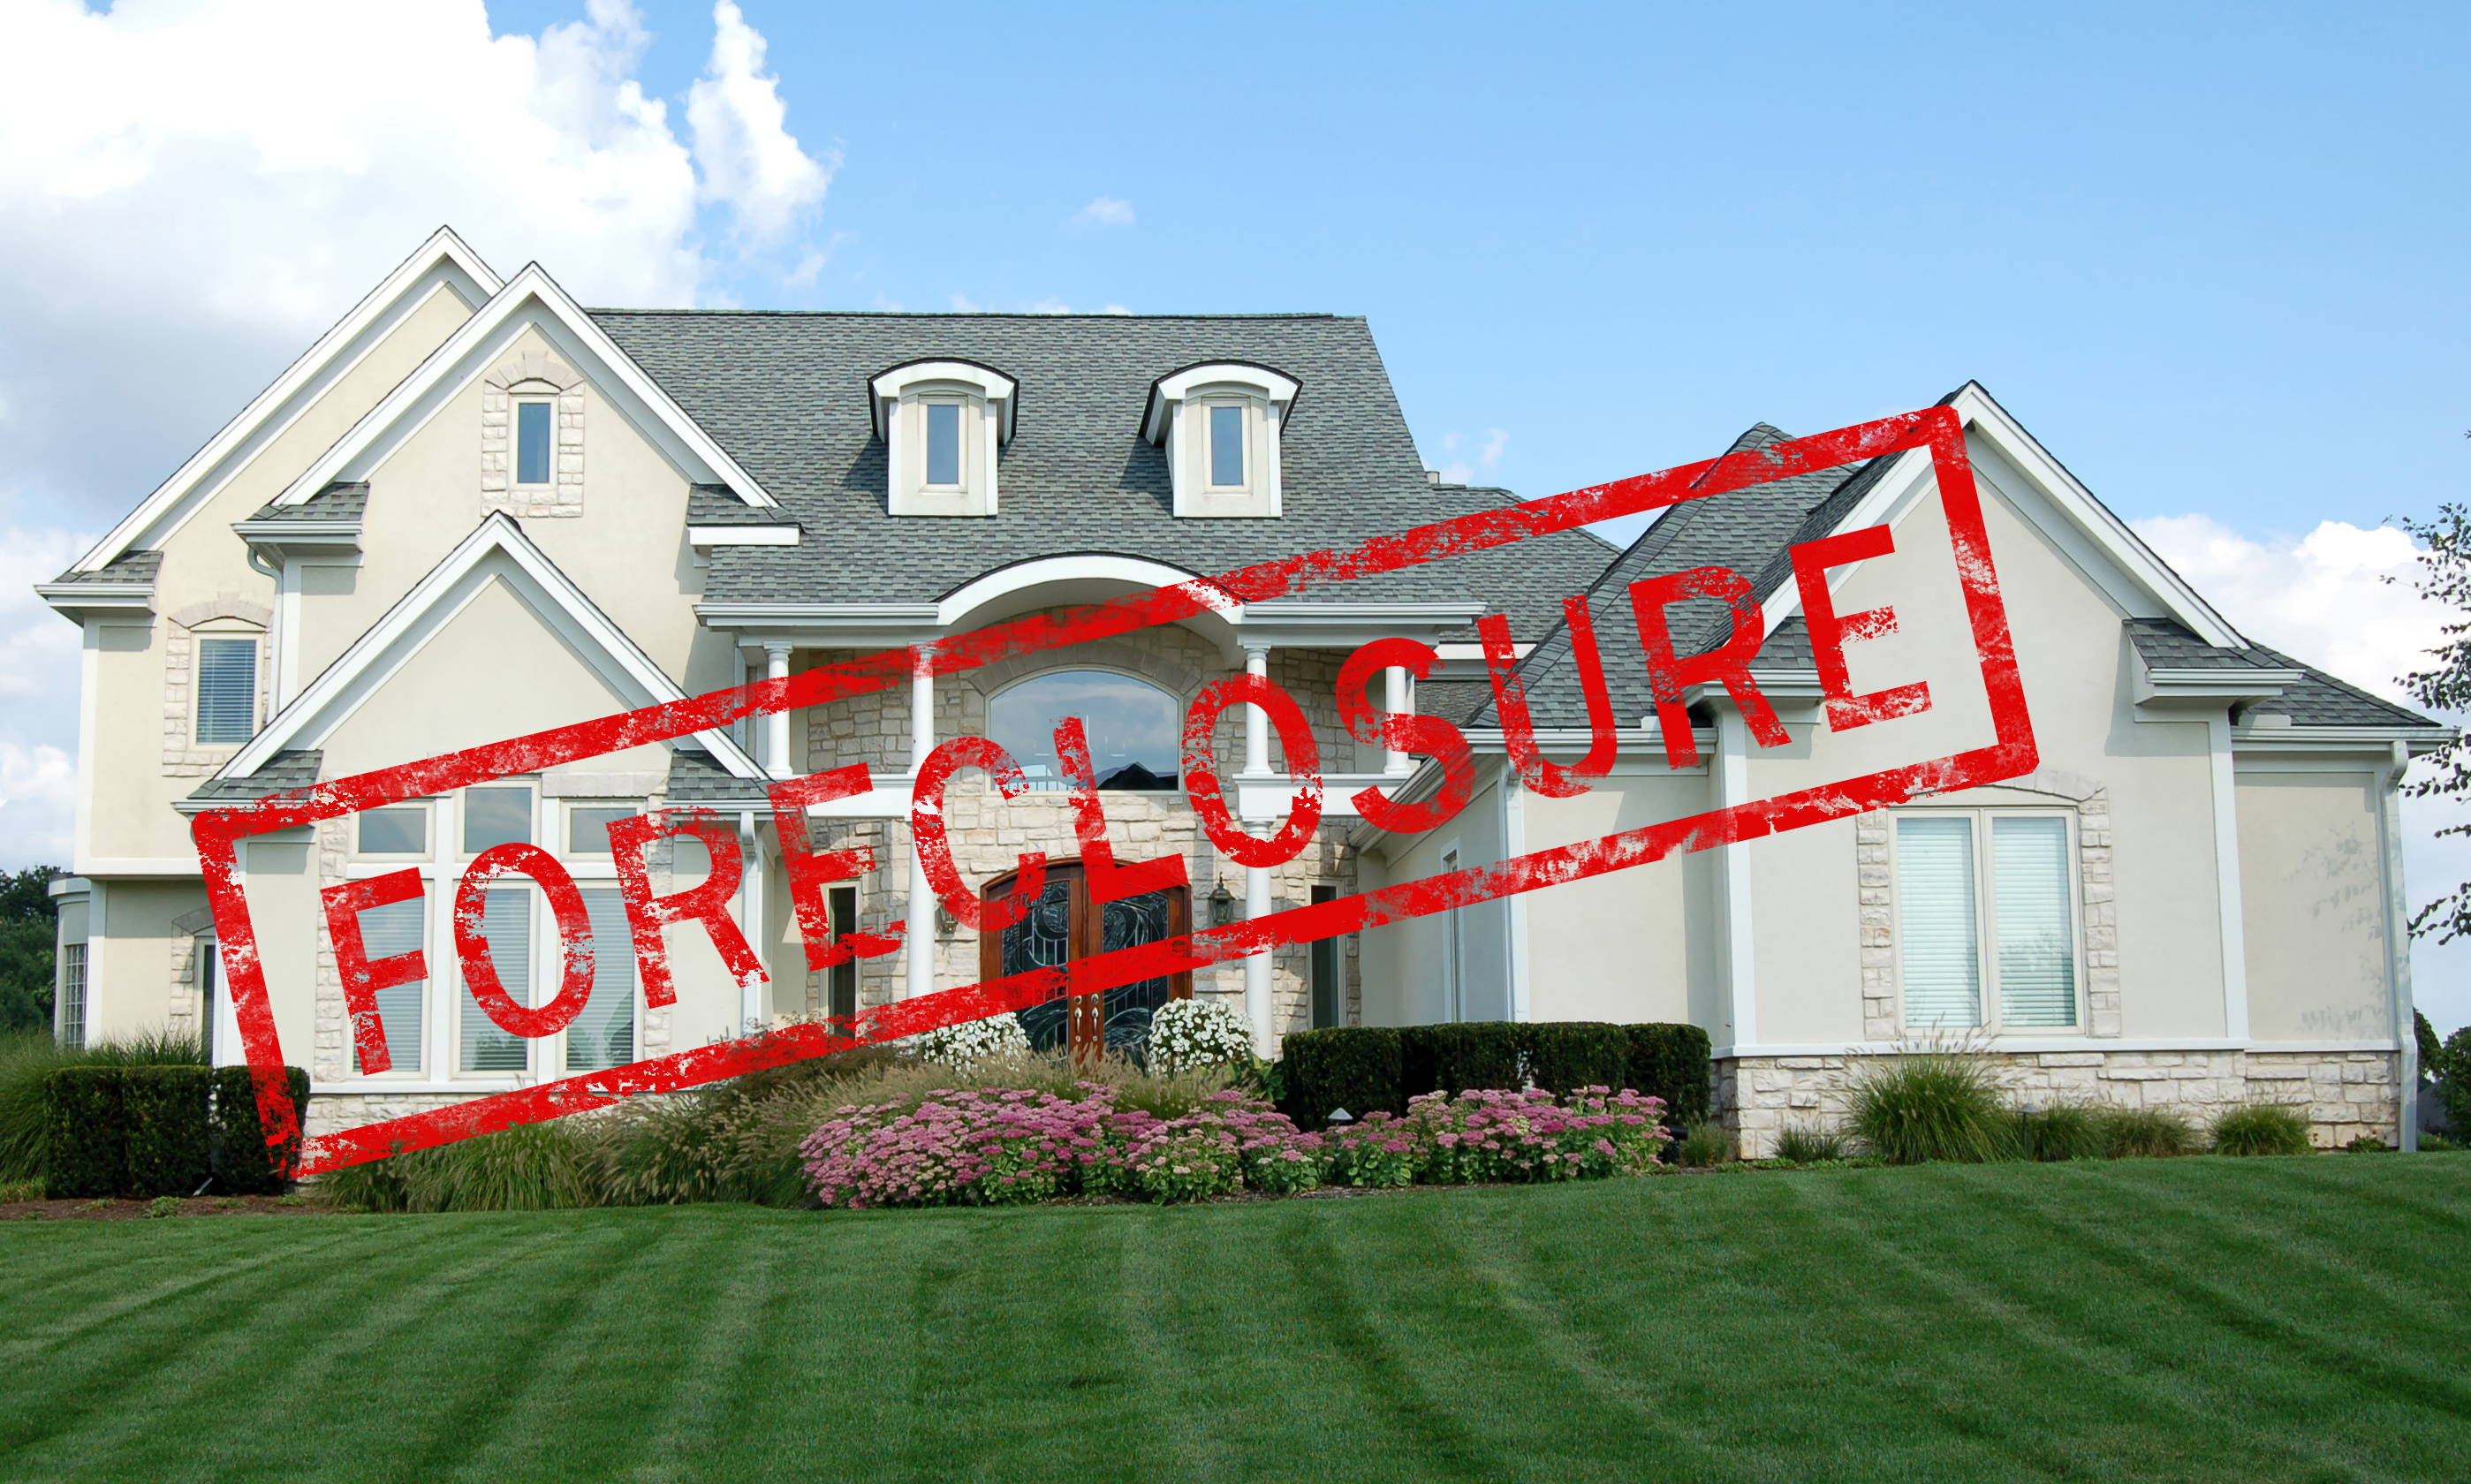 Call Delaney Valuations LLC when you need appraisals for Bucks foreclosures